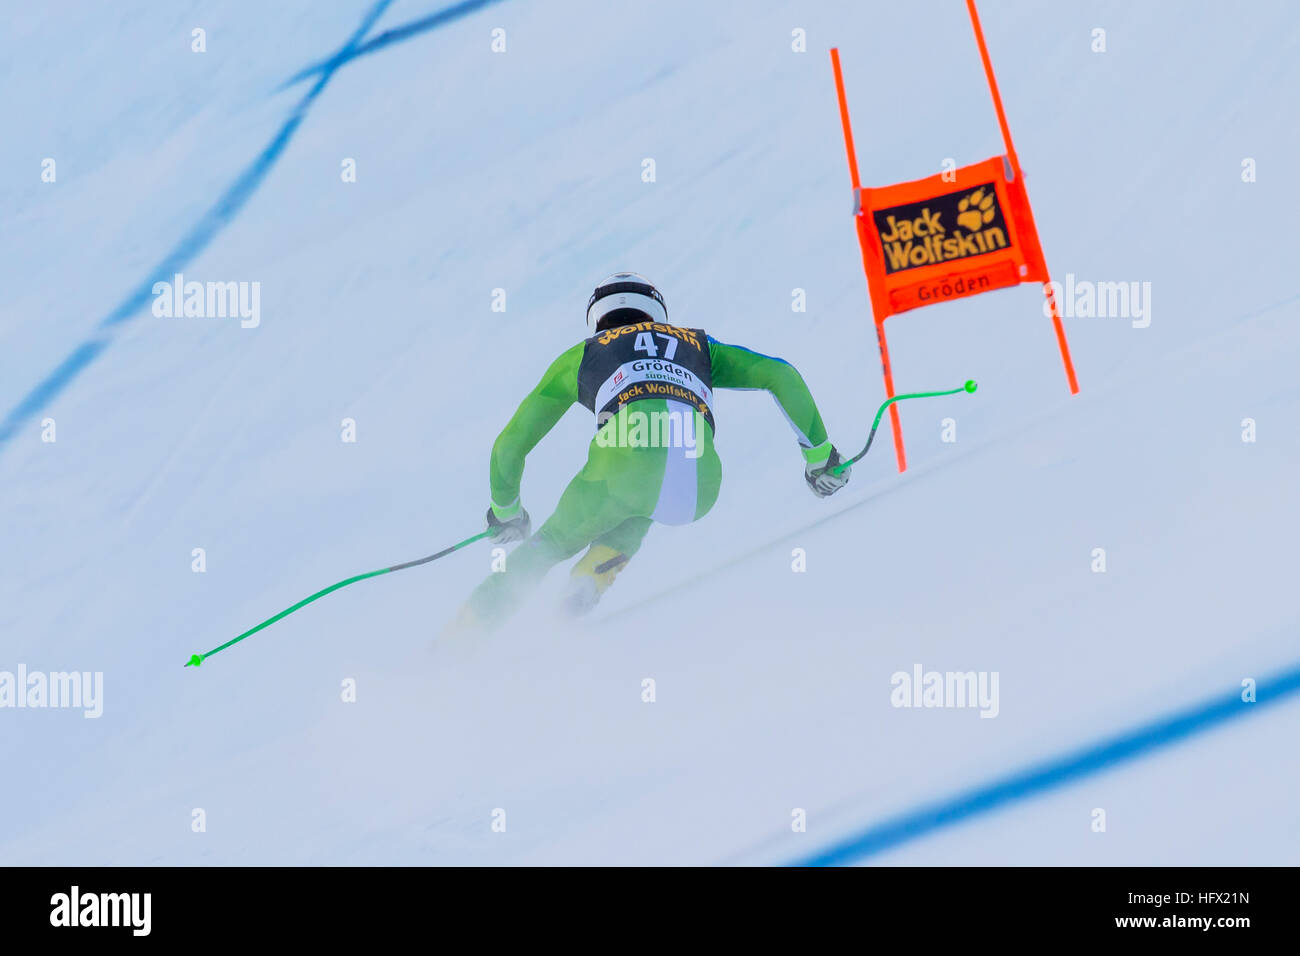 Val Gardena, Italy 17 December 2016. PERKO Rok (Slo) competing in the Audi Fis Alpine Skiing World Cup Men’s Downhill Race on the Saslong Course Stock Photo